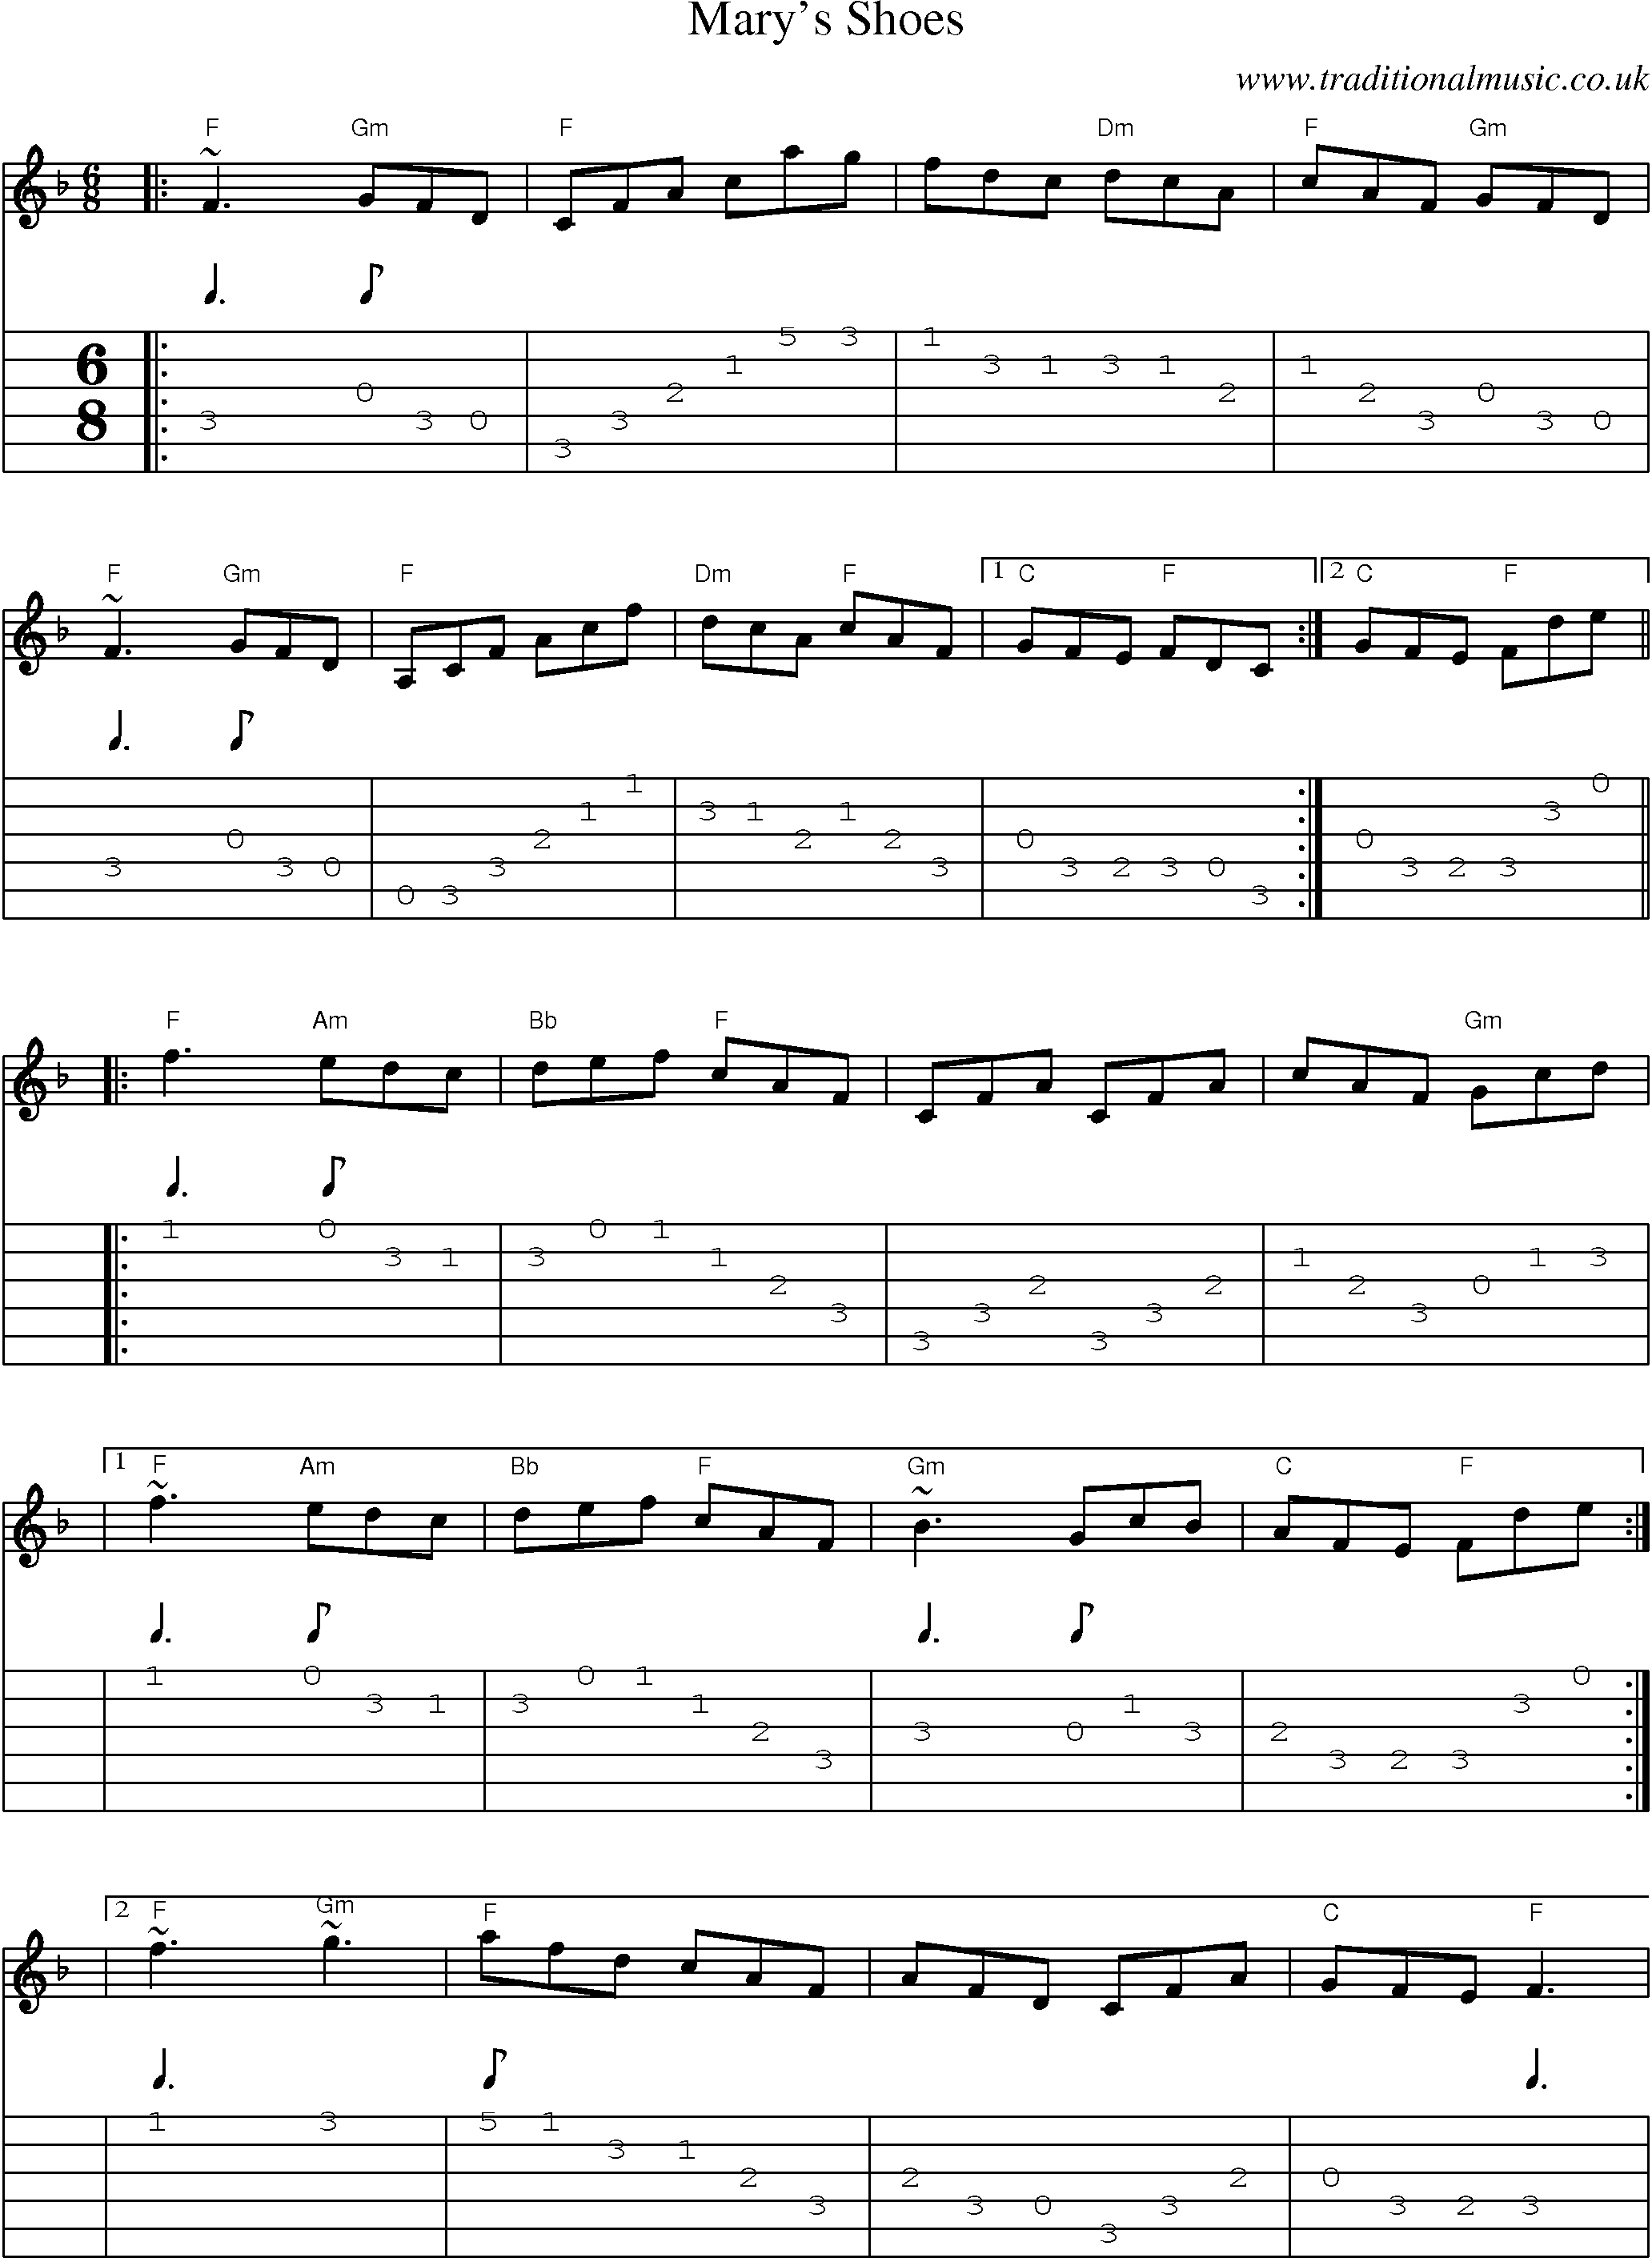 Music Score and Guitar Tabs for Marys Shoes